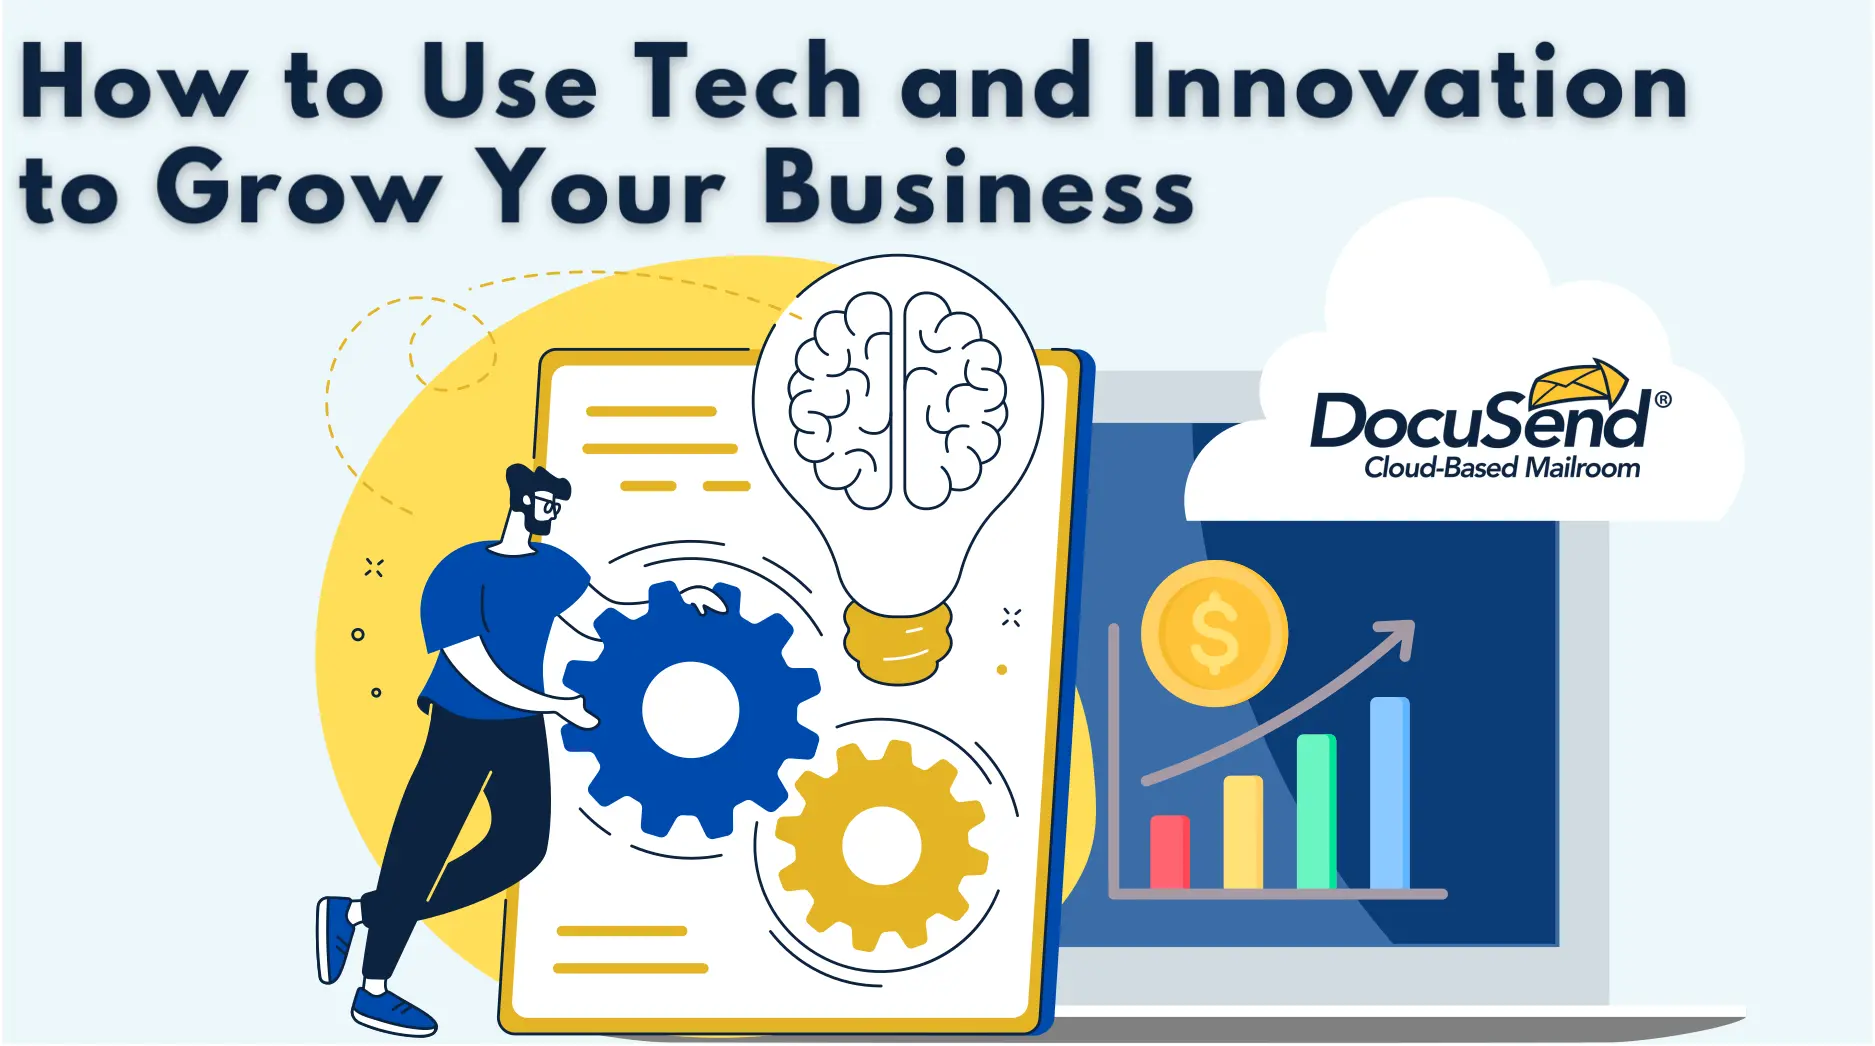 How technology and innovation improves business?